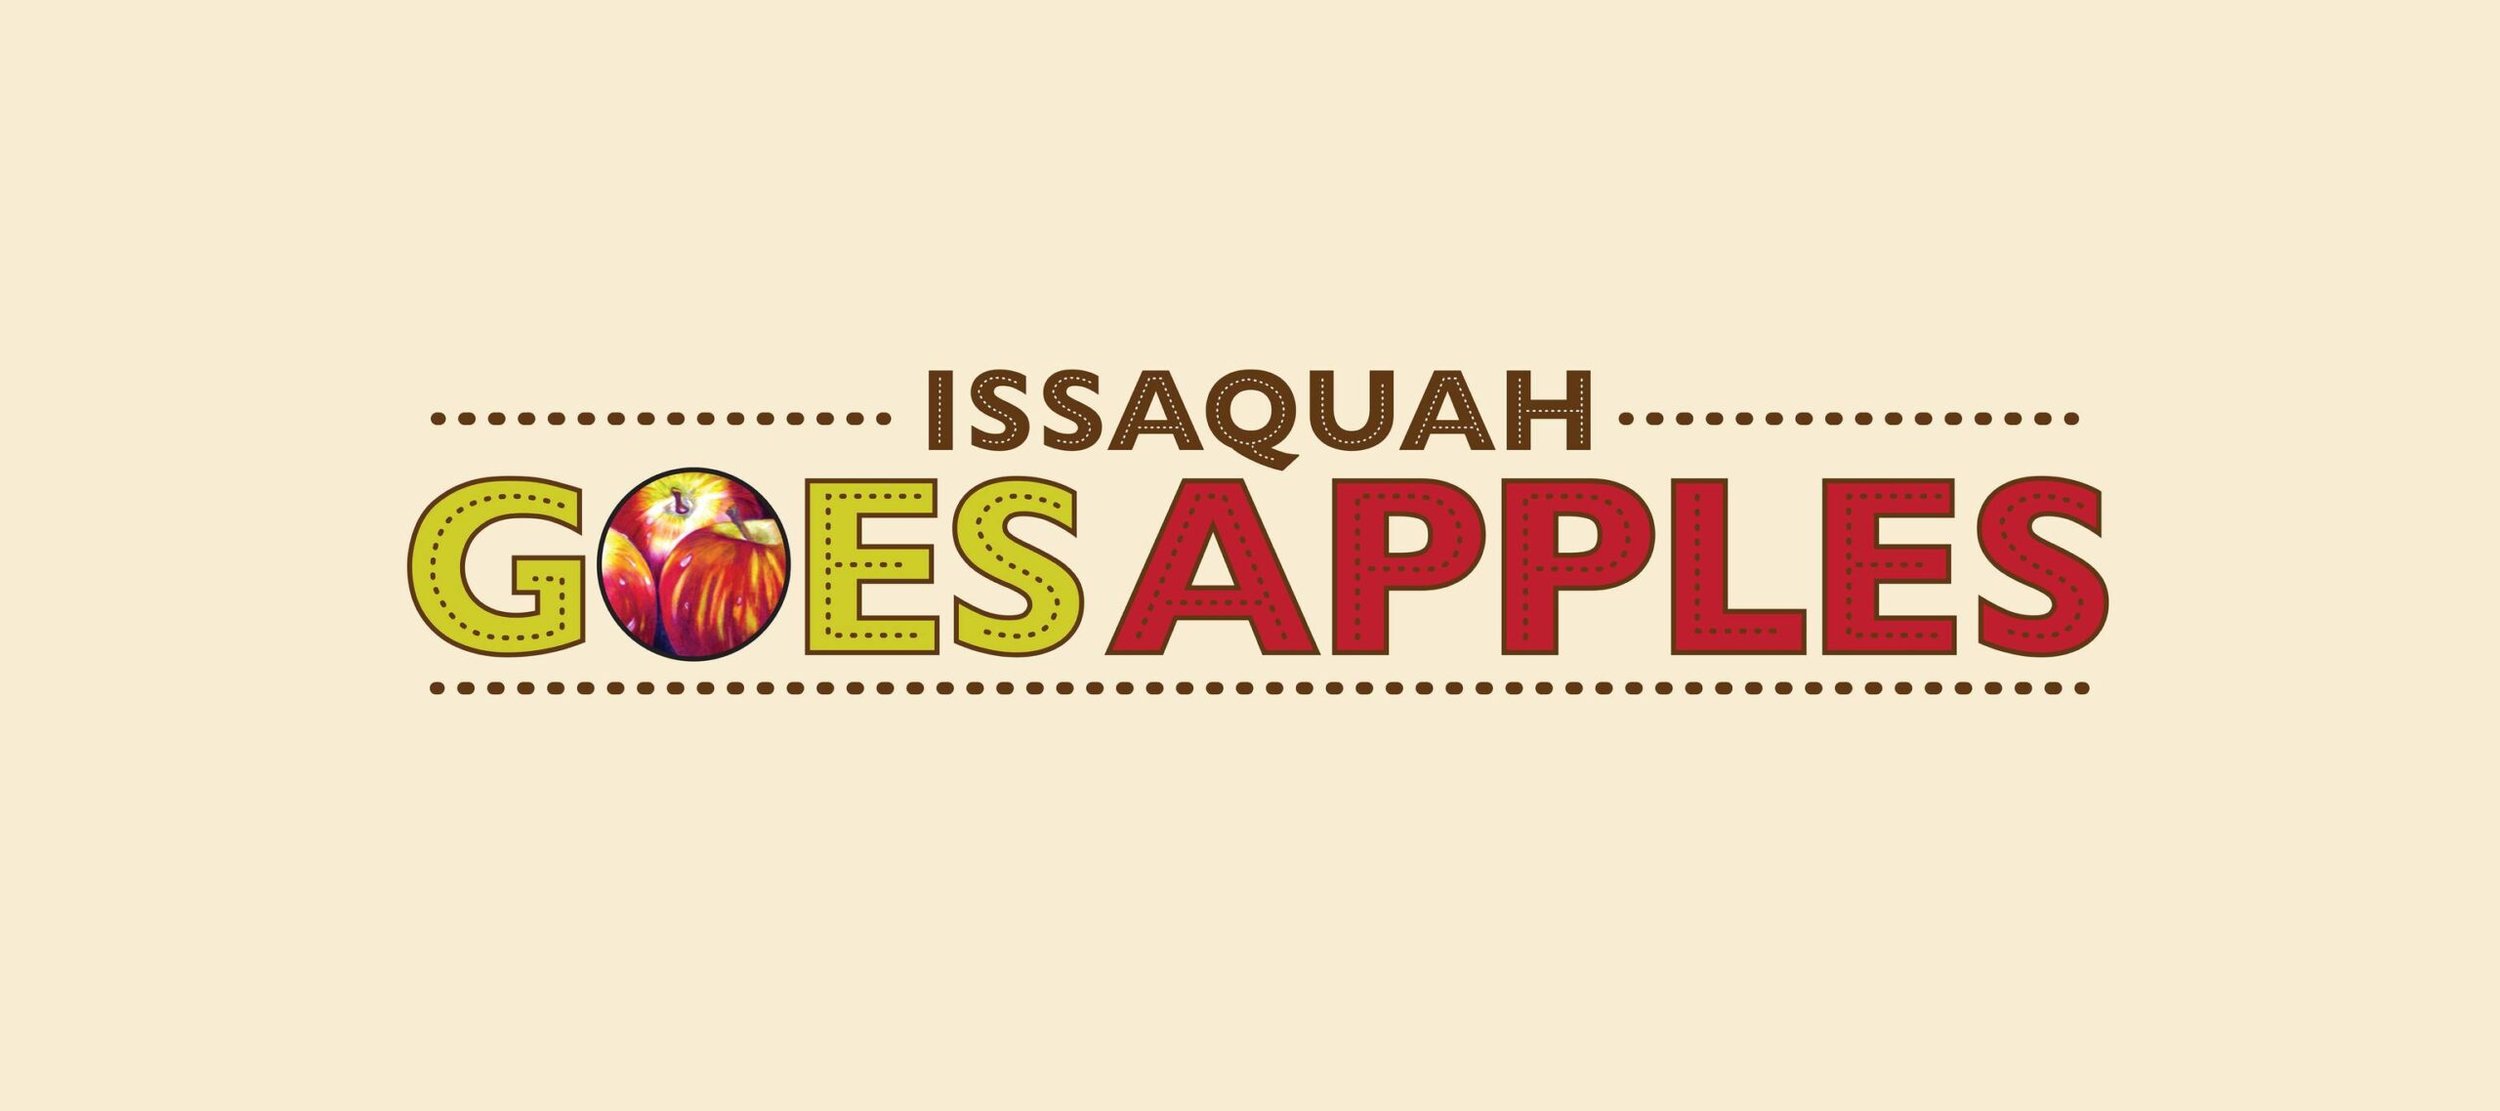 issaquah goes apples